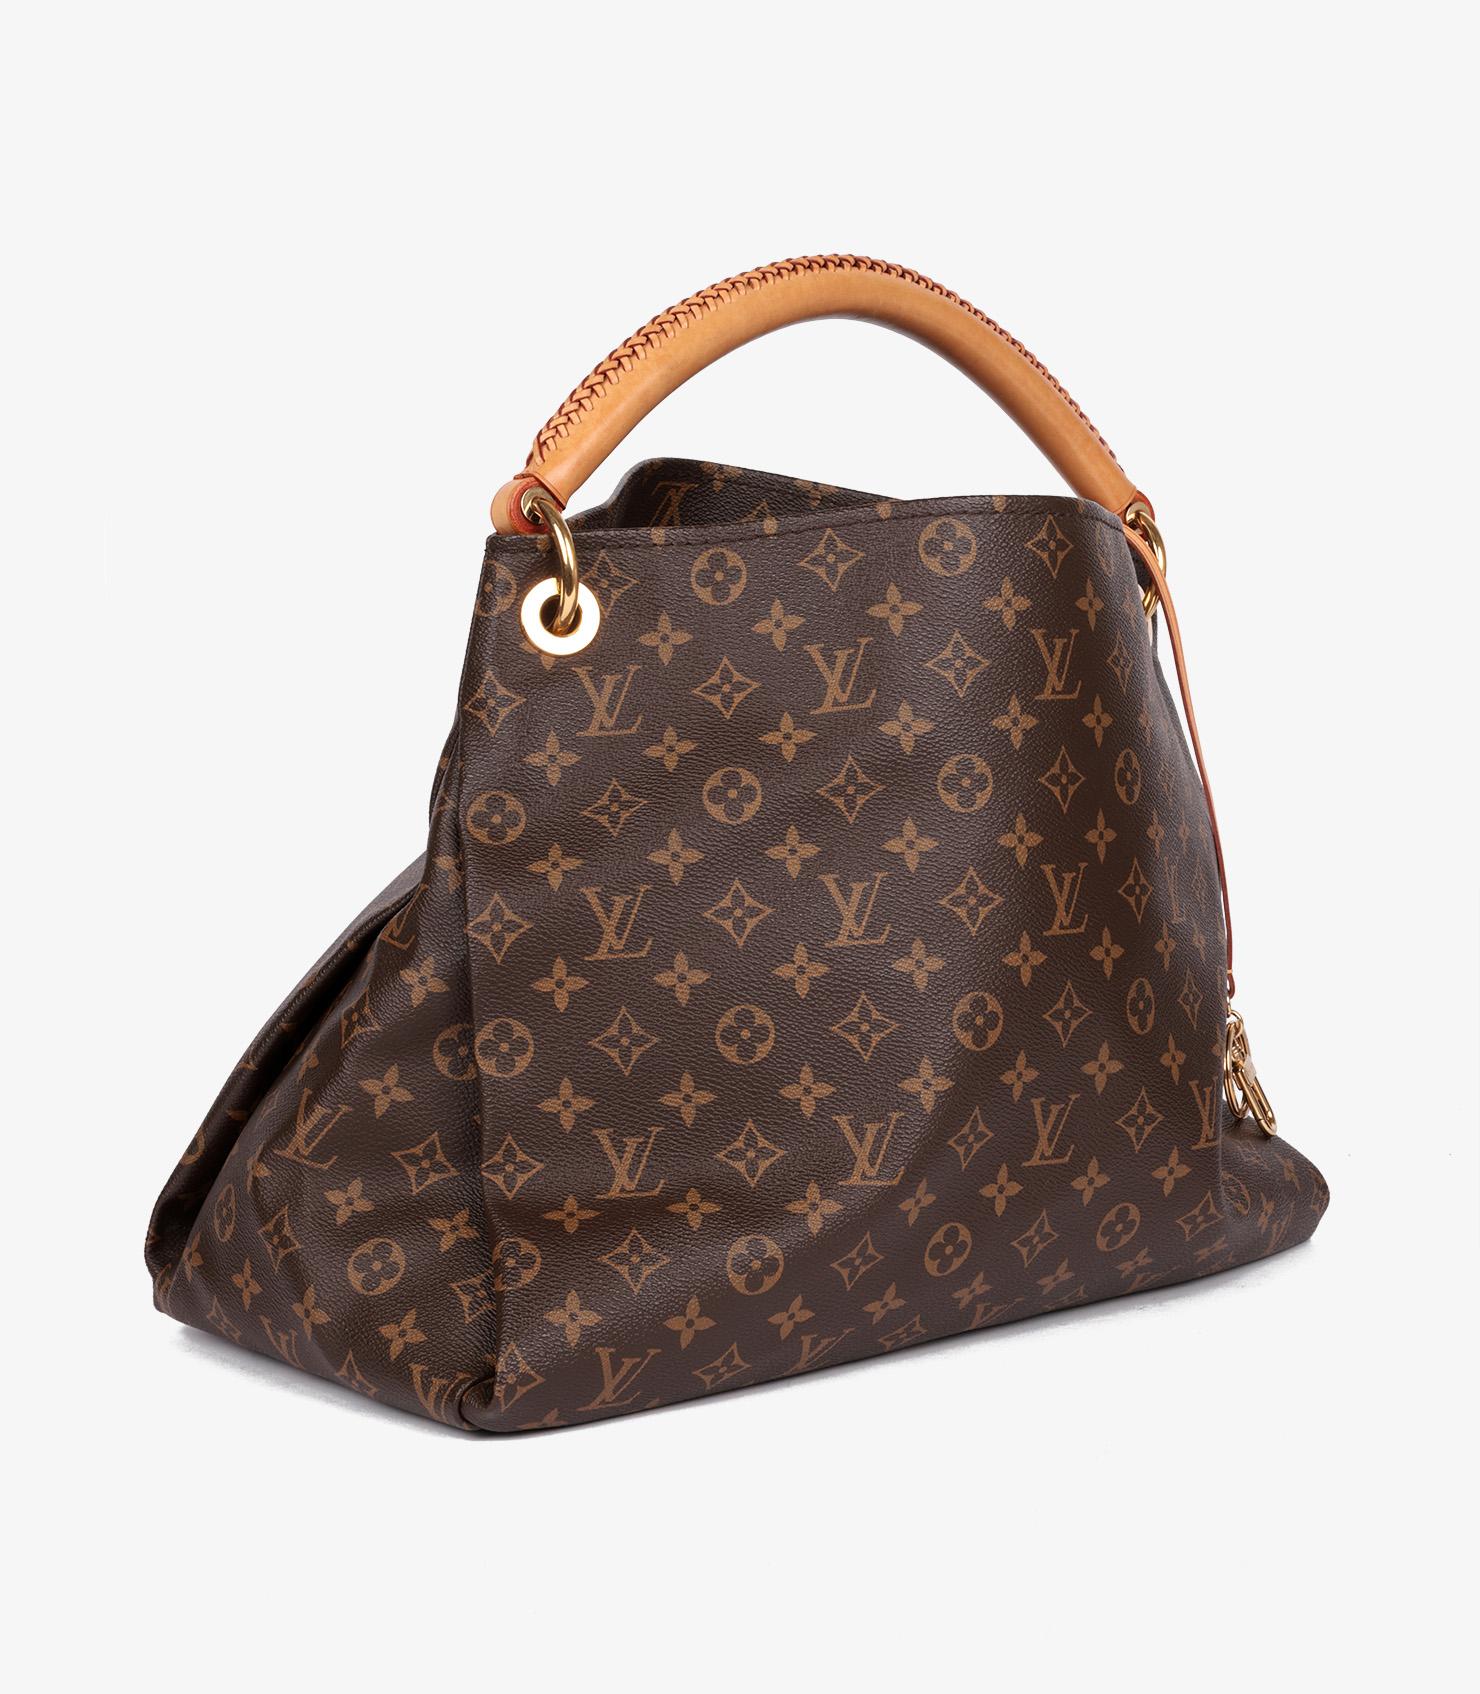 Louis Vuitton Brown Monogram Coated Canvas & Vachetta Leather Artsy MM

Brand- Louis Vuitton
Model- Artsy MM
Product Type- Shoulder, Top Handle
Serial Number- CR****
Age- Circa 2011
Accompanied By- Louis Vuitton Dust Bag
Colour- Brown
Hardware-